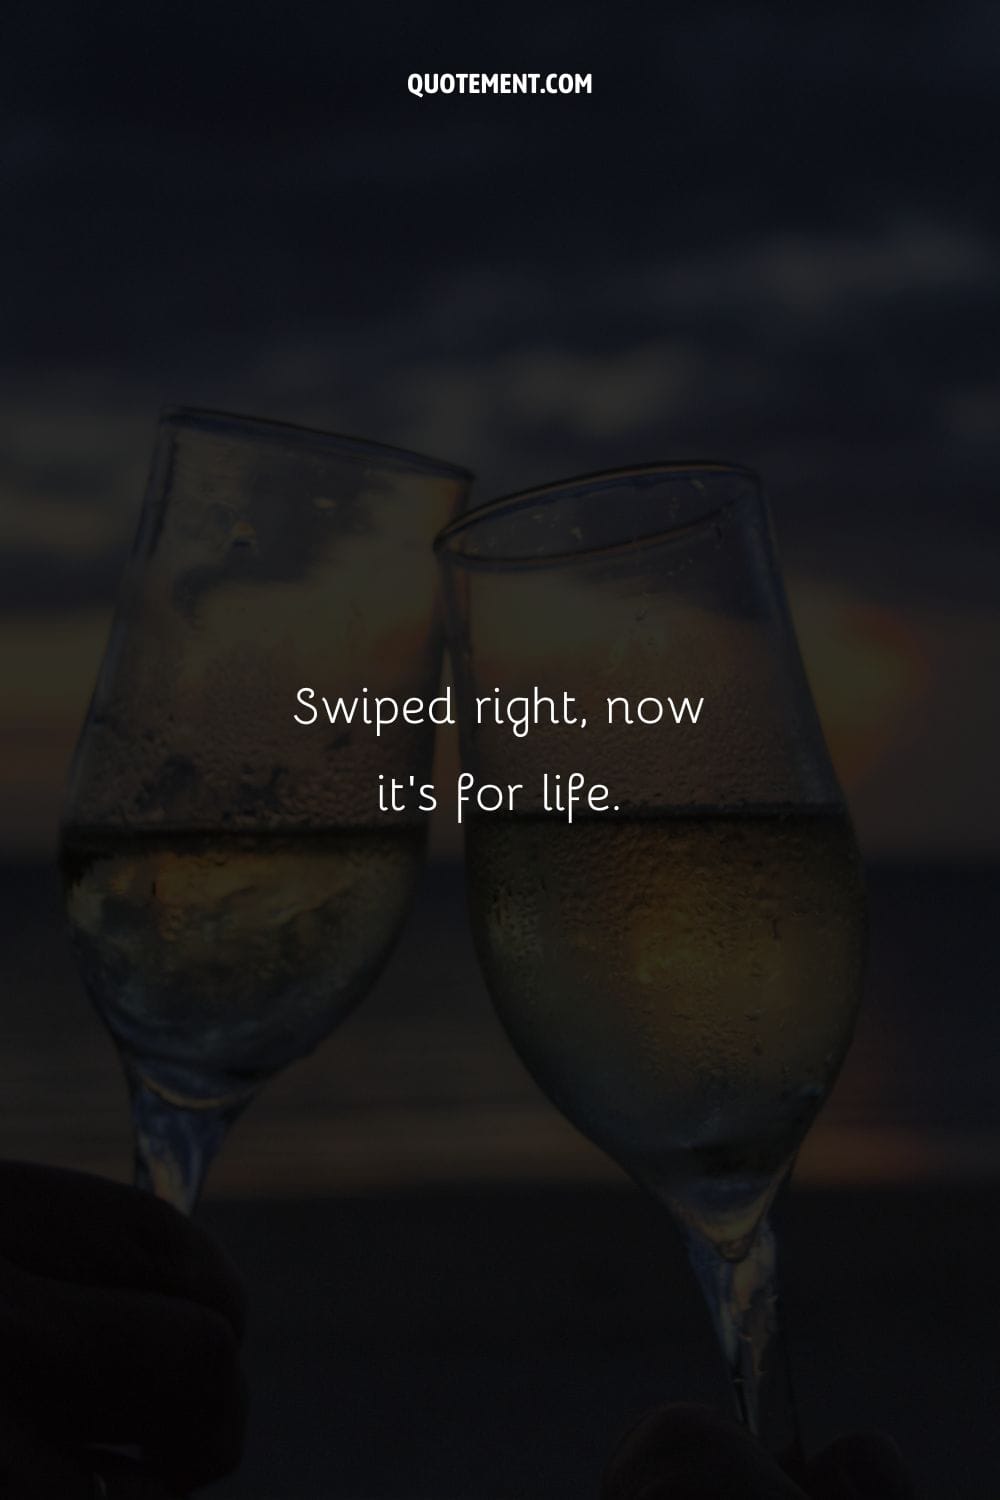 Image of two glasses representing cute caption for couples.